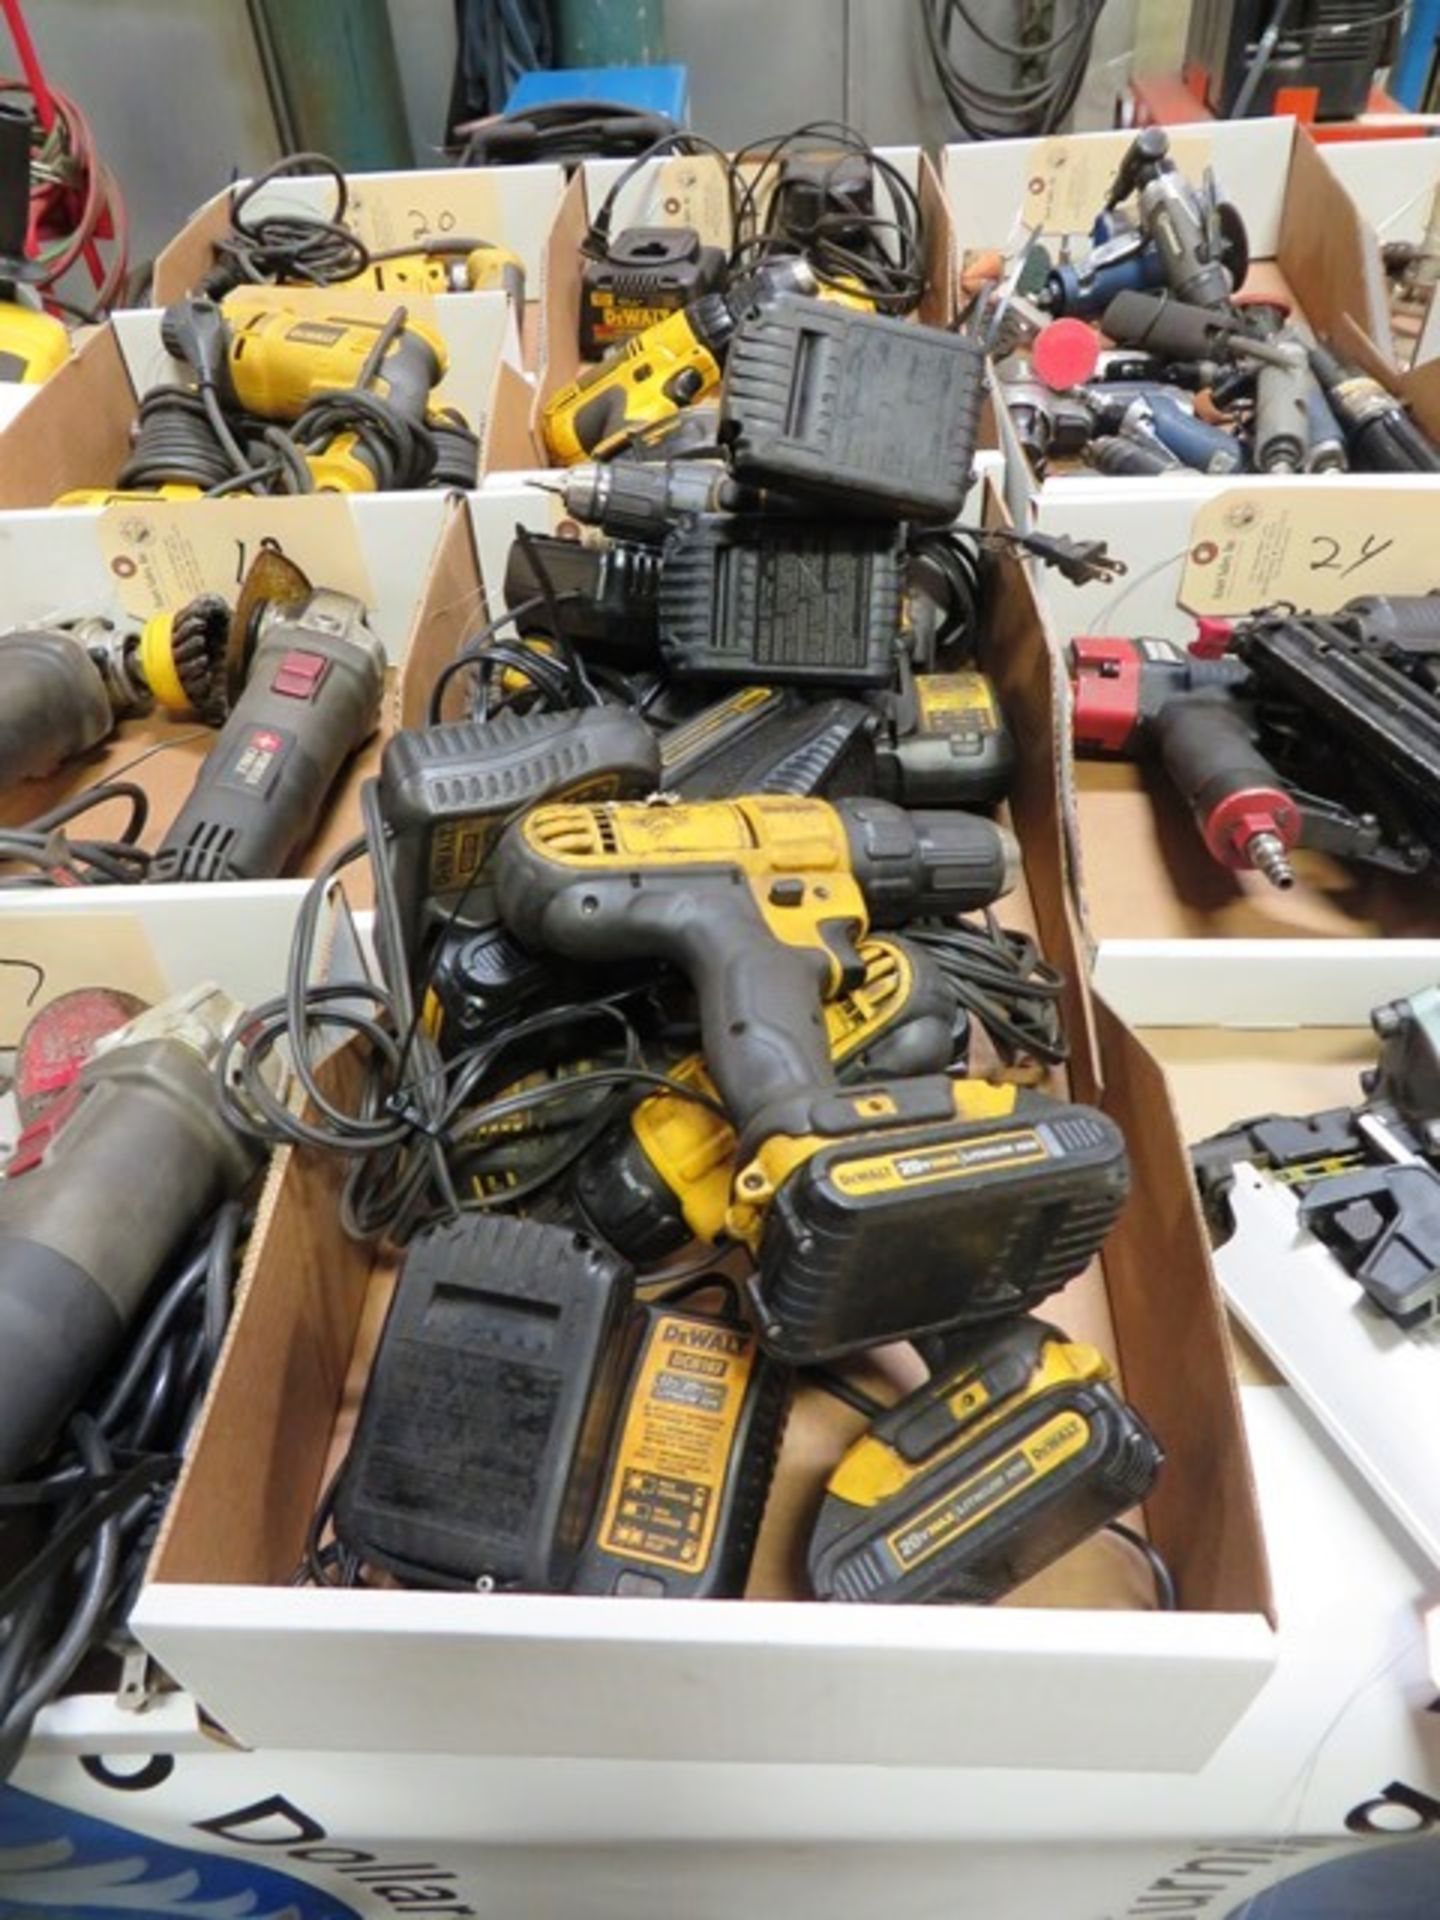 Dewalt Cordless Drills with 20V Max, Lithium Batteries/Chargers